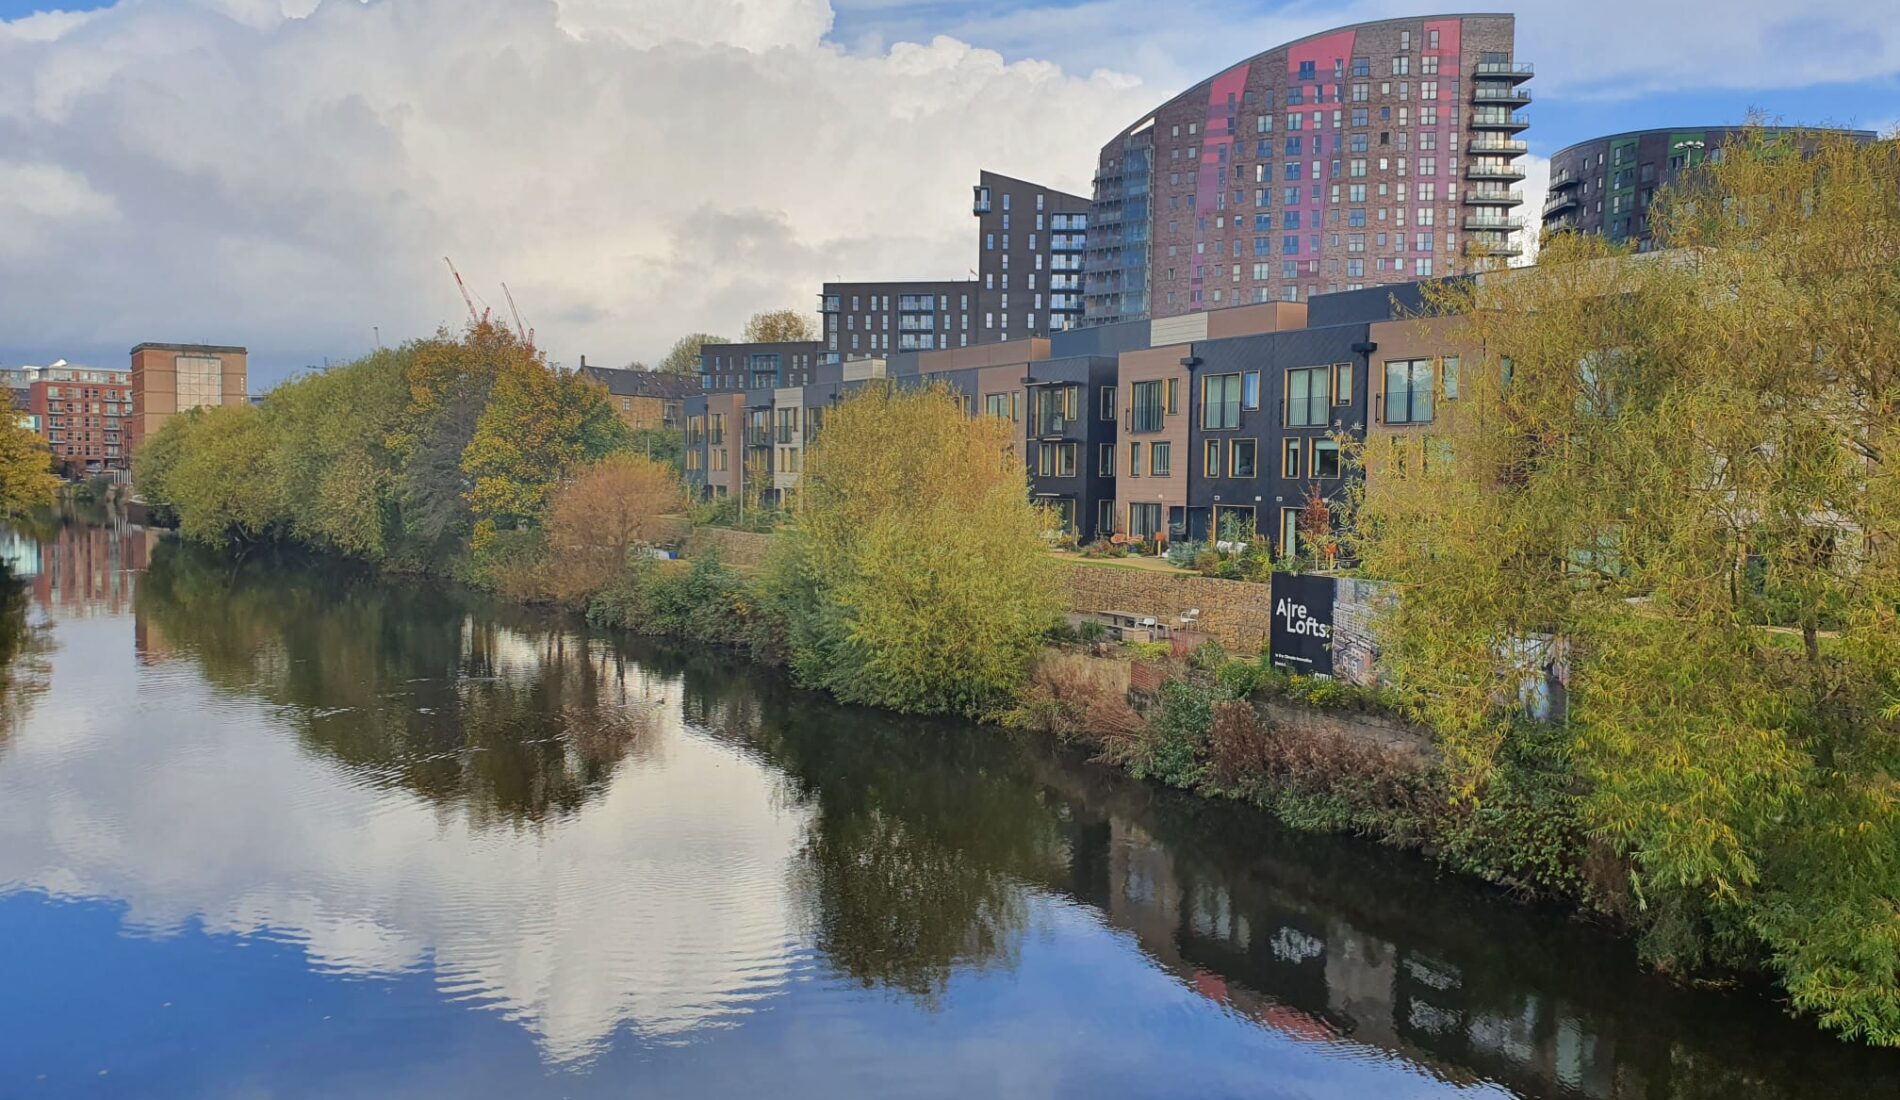 houses beside the River Aire in Leeds